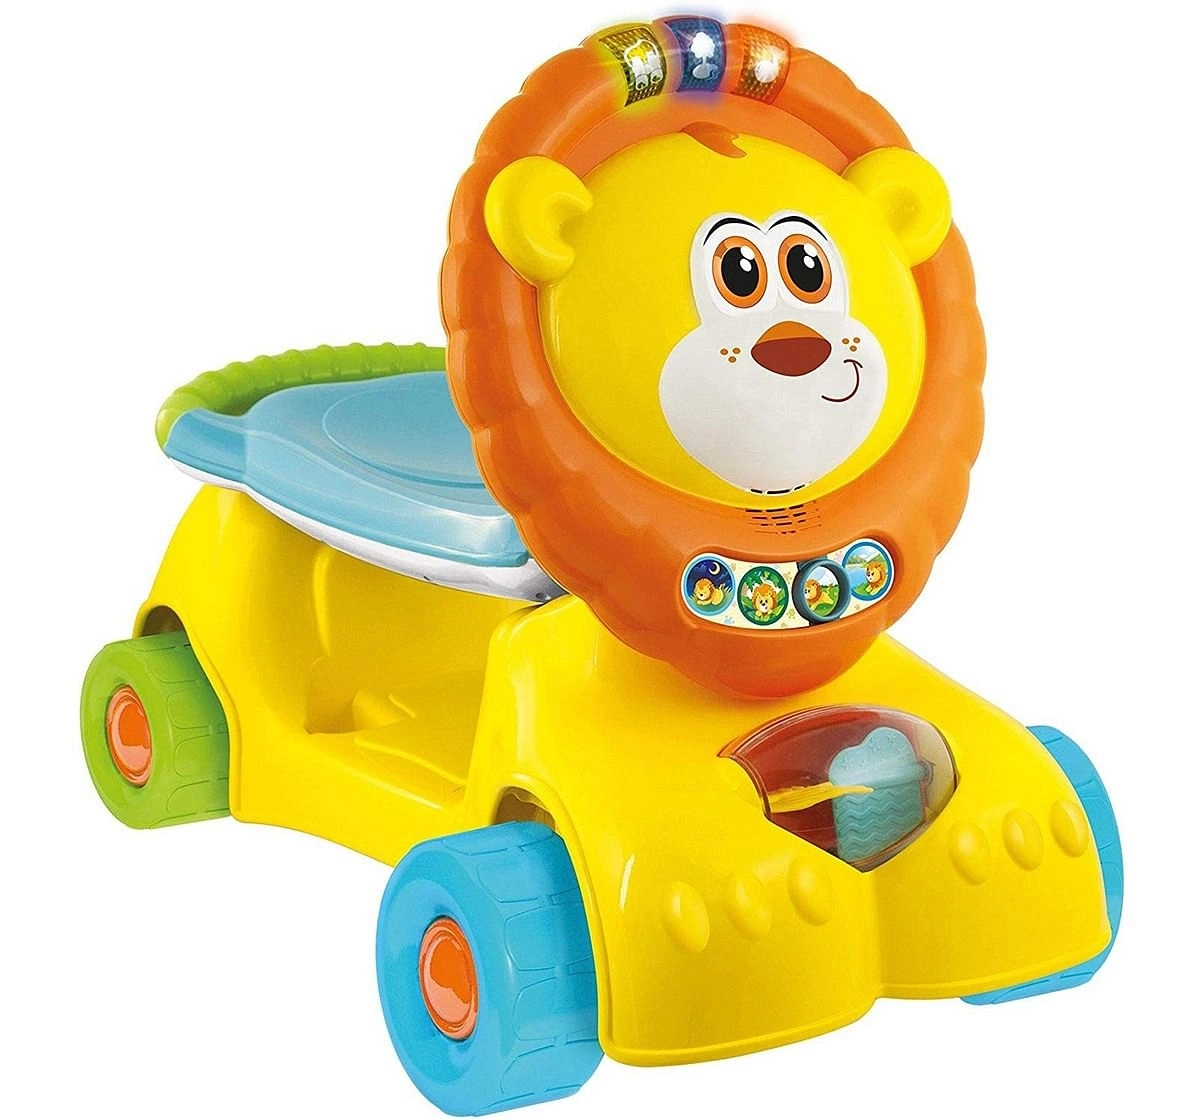 Winfun 3 in 1 Grow With Me Lion Scooter Baby Gear for Kids age 12M+ (Yellow)